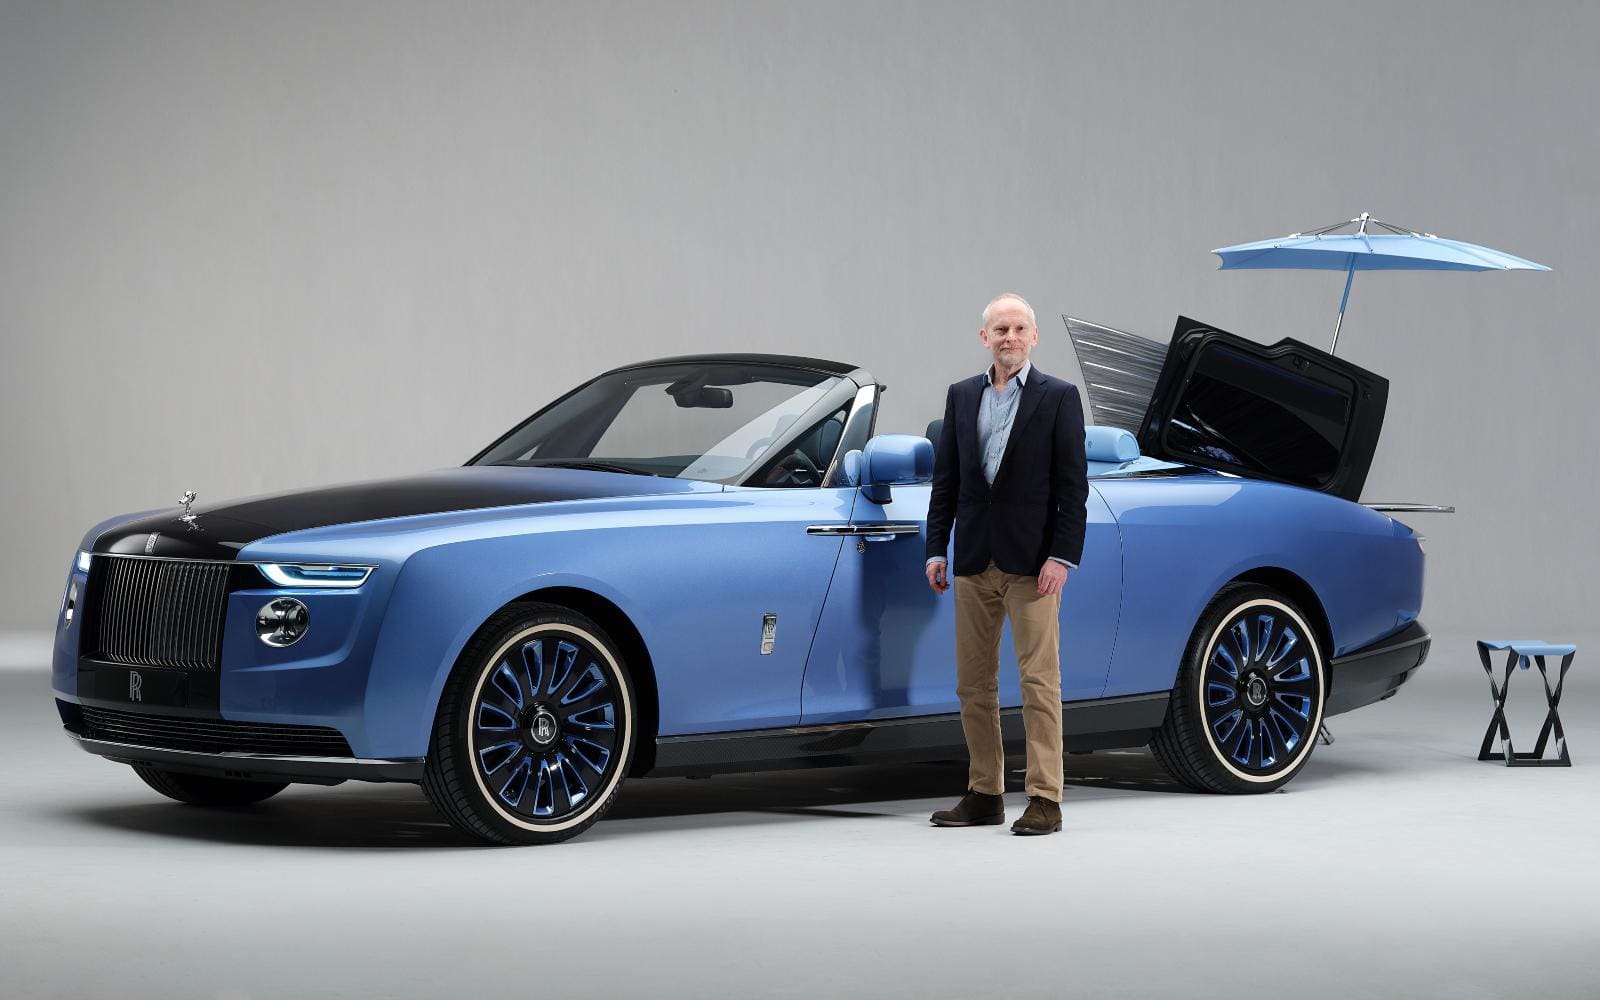 RollsRoyces Boat Tail becomes the worlds most expensive new car  Luxury  London